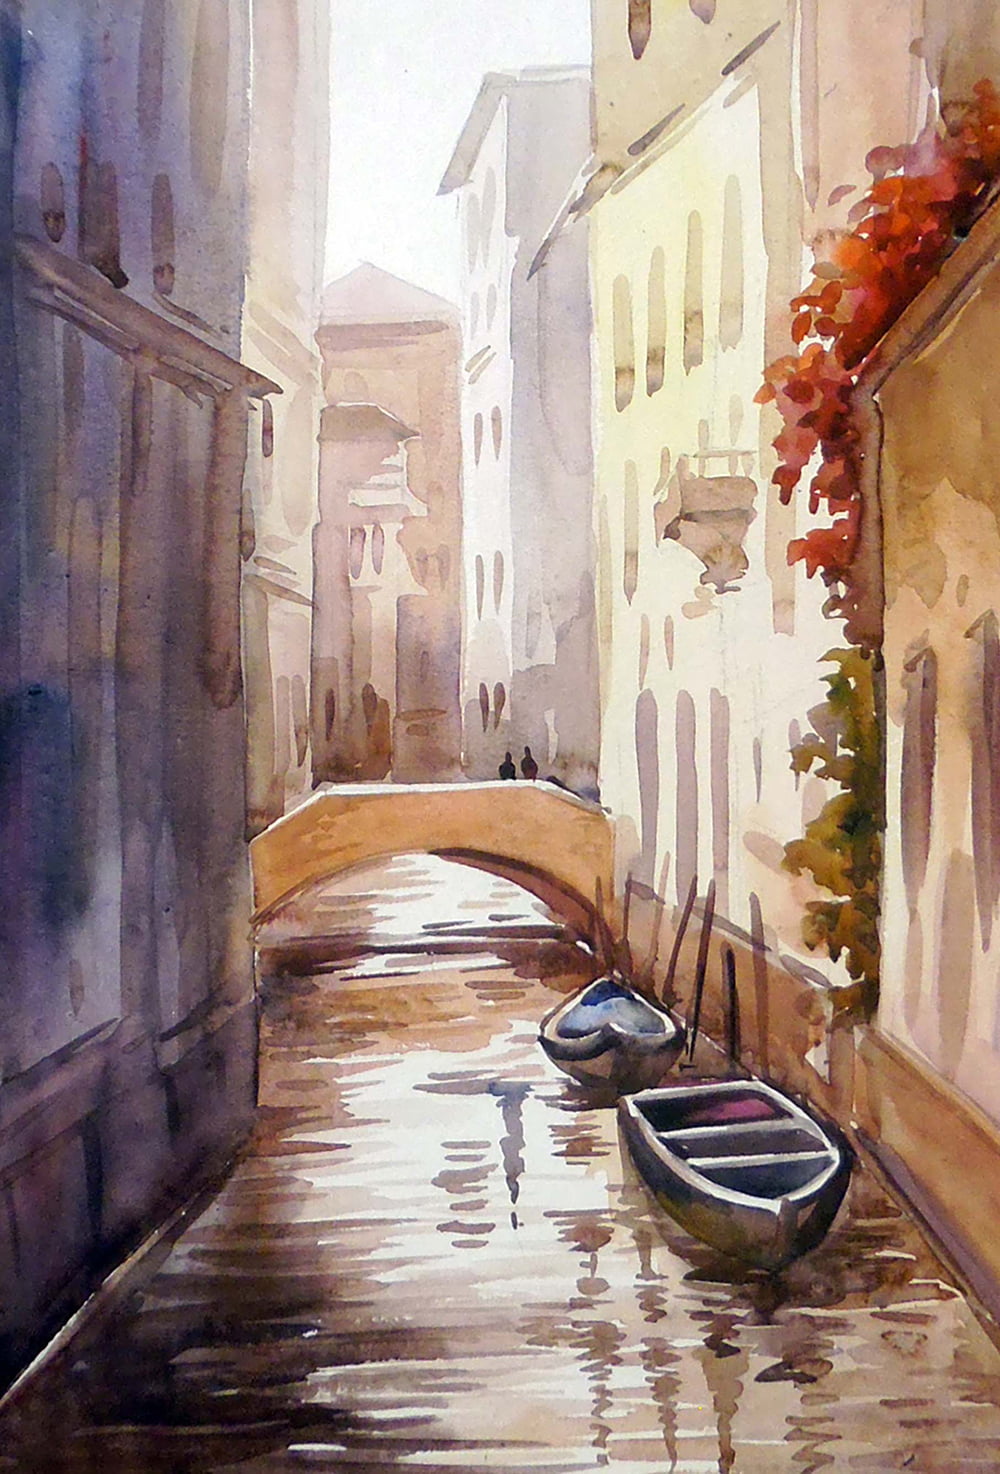 Venice – Canal in The Early Morning, Samiran Sarkar (India) - Exquisite Art